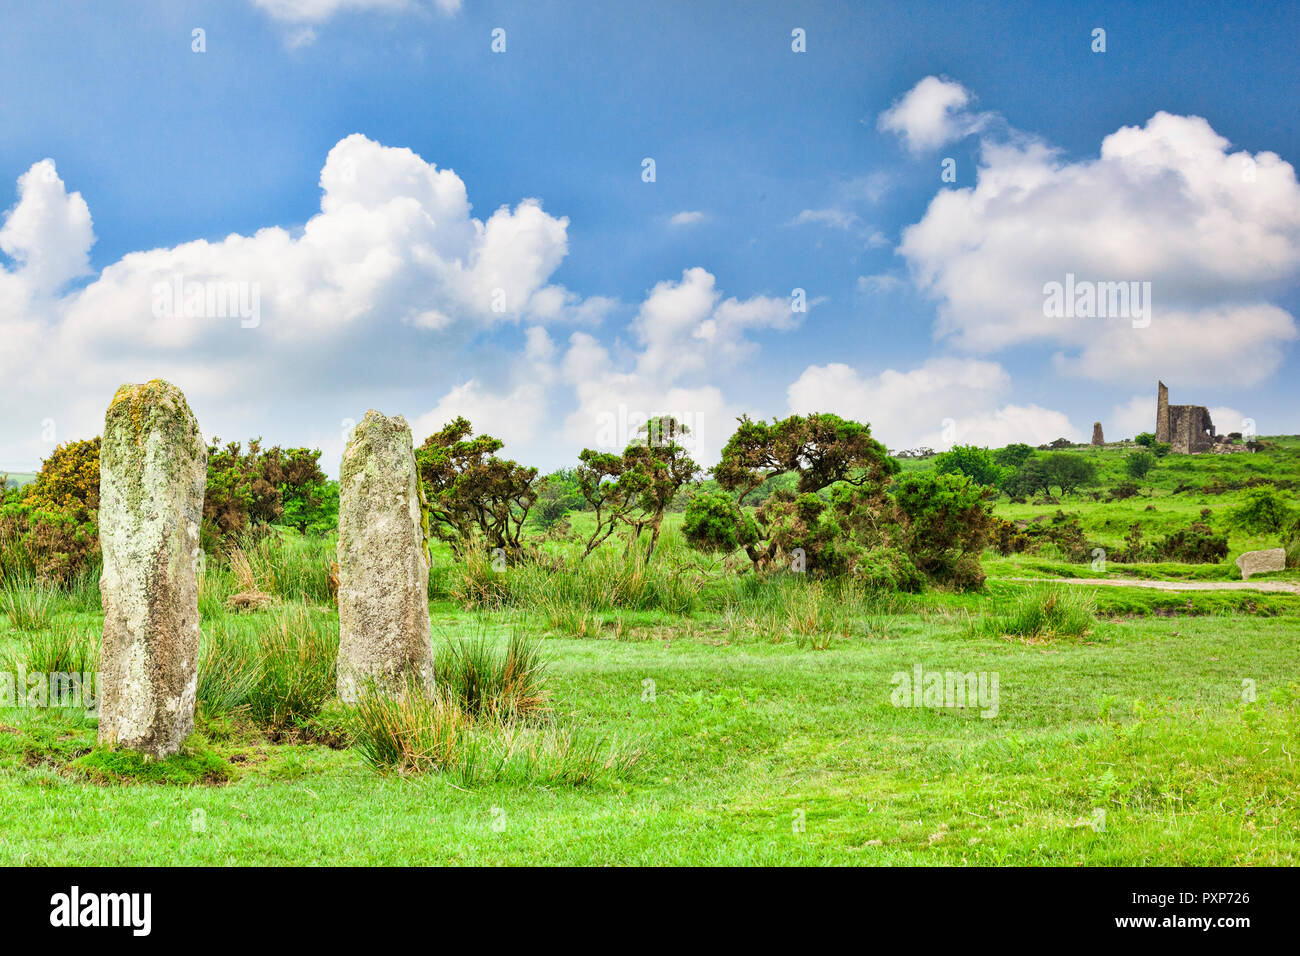 The Pipers, a pair of standing stones on Bodmin Moor near the village of Minions, Cornwall, UK Stock Photo